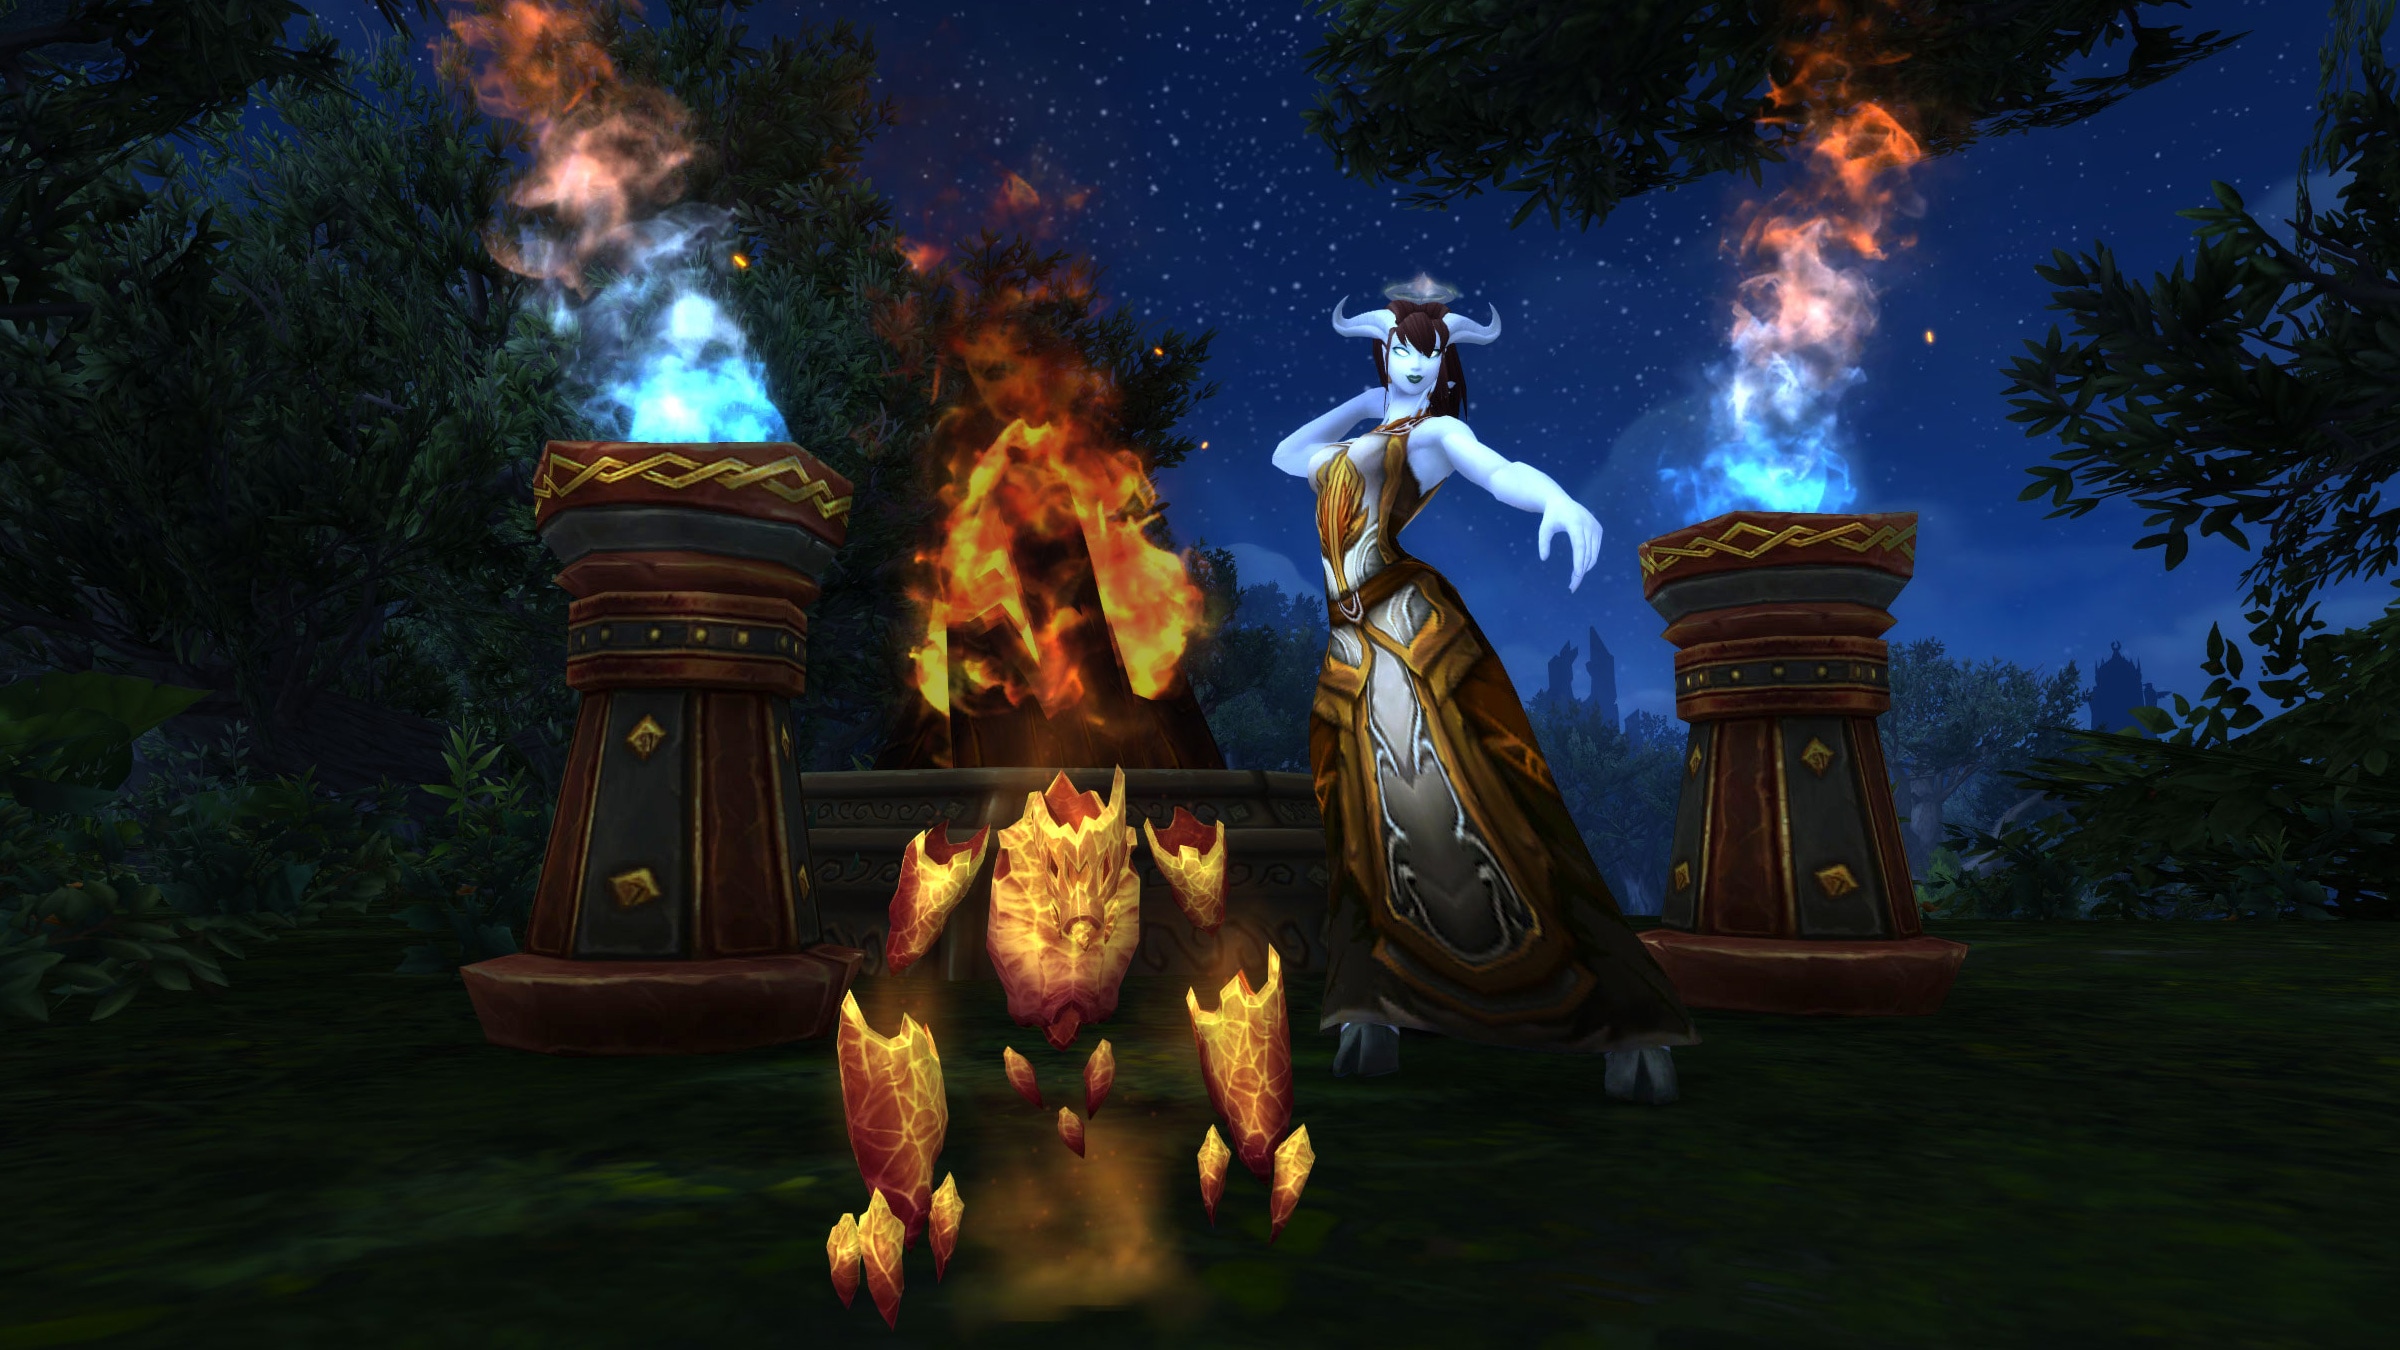 The Flames of the Midsummer Fire Festival Burn Bright! June 21–July 5